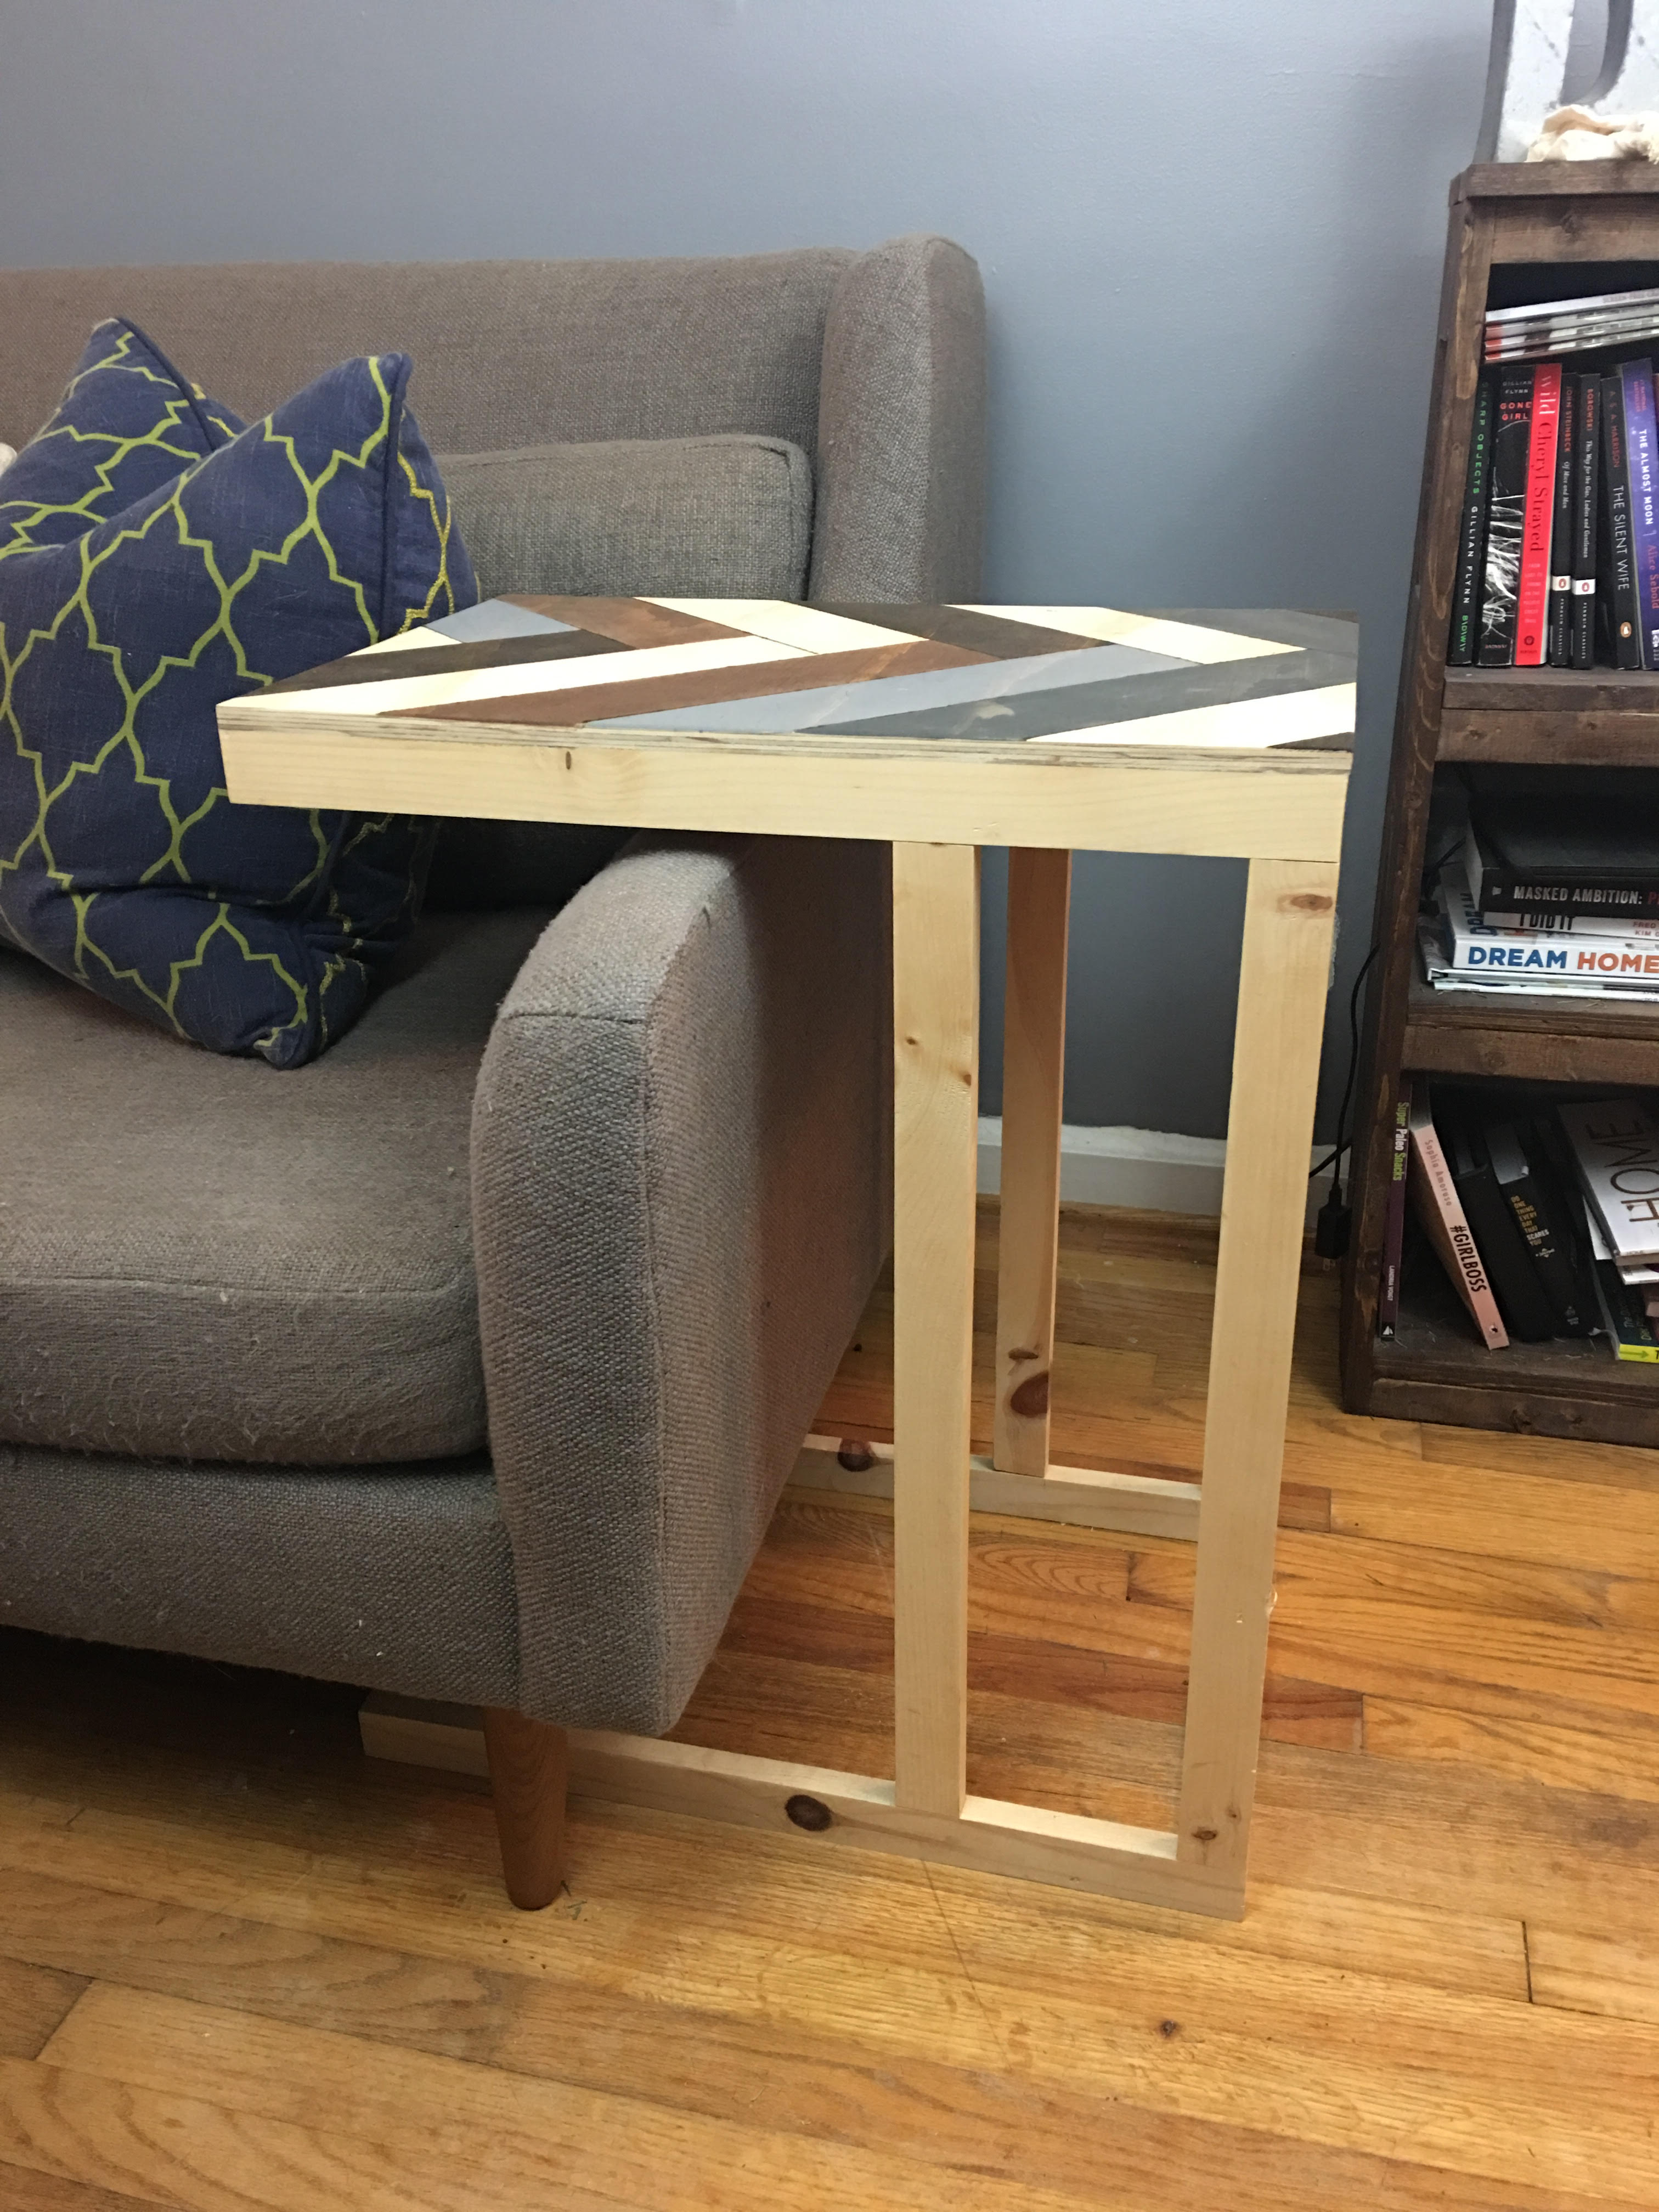 upcycle c-table